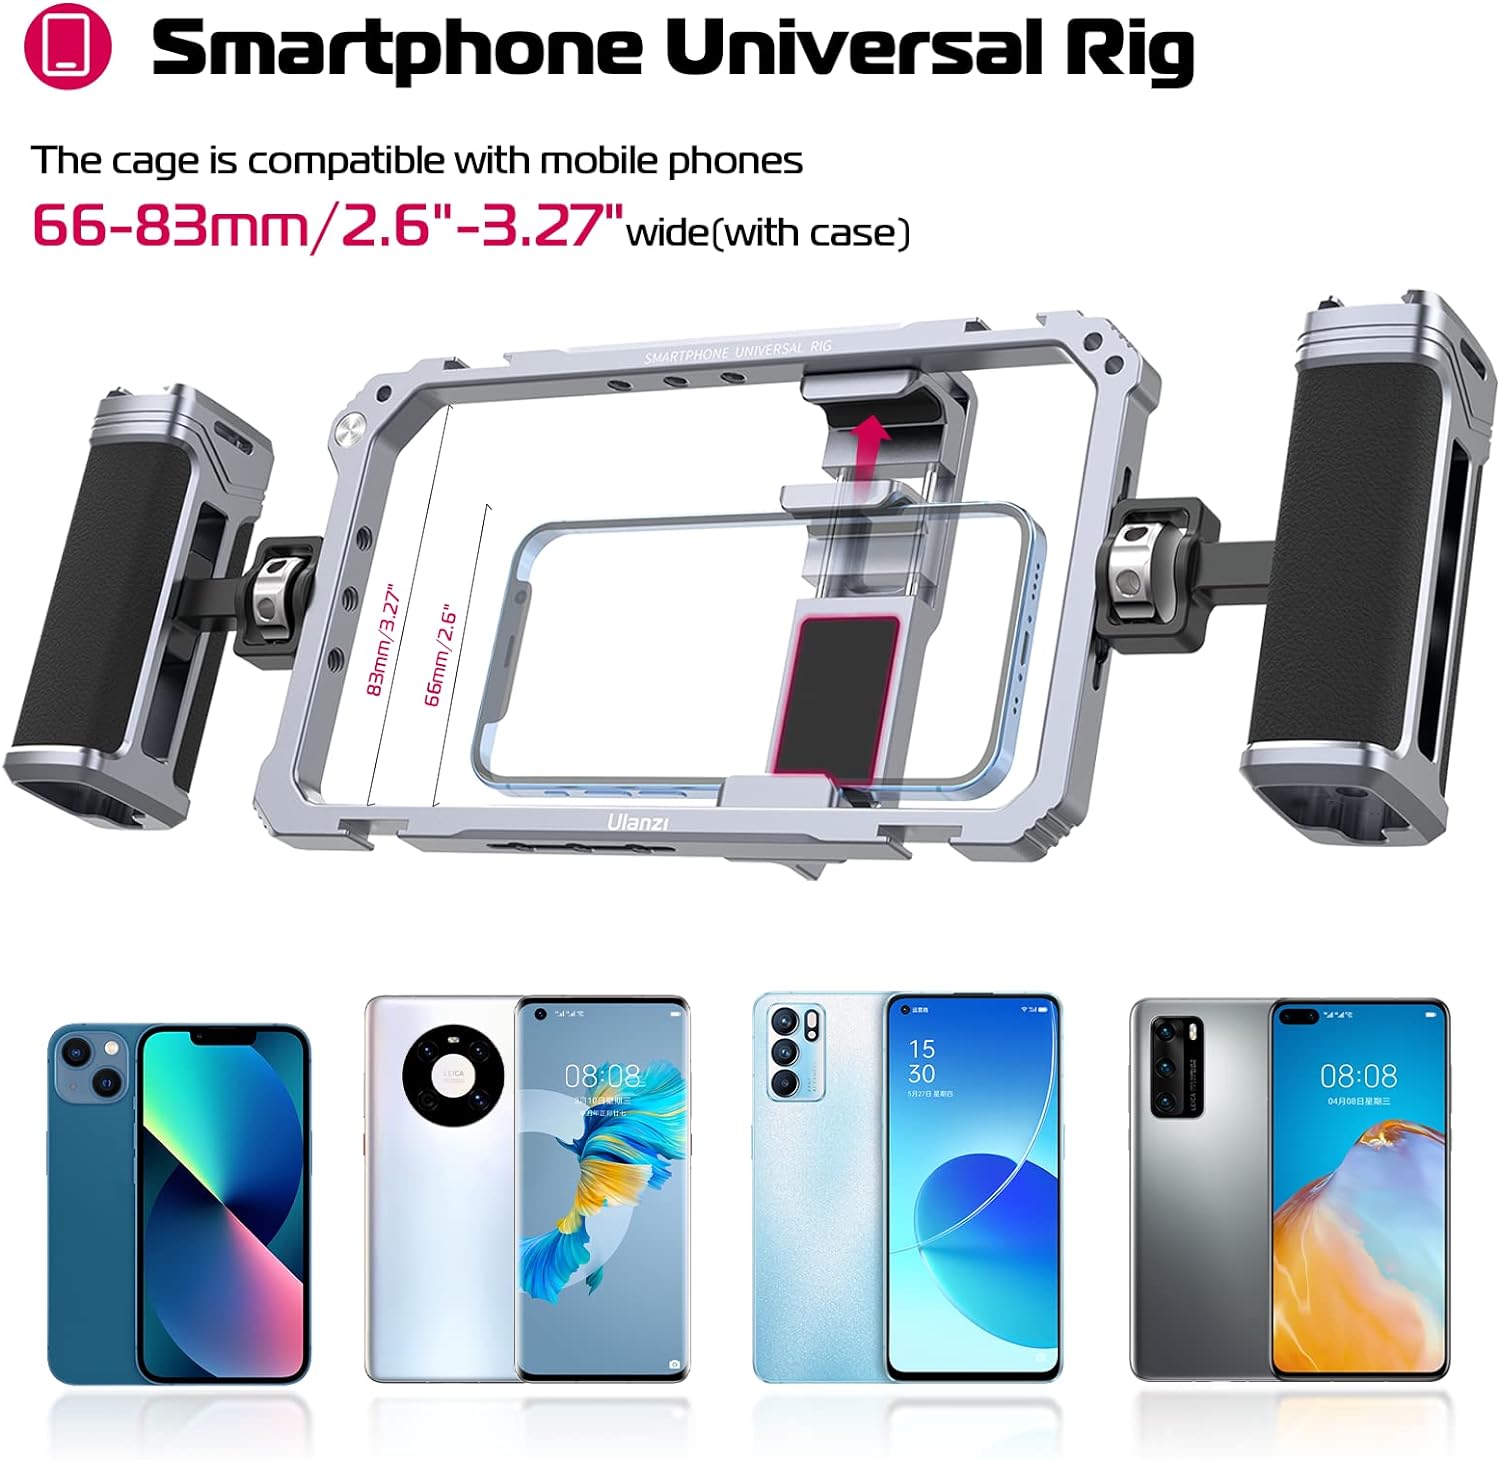 ULANZI Universal Phone Video Rig Kit with Handles, Aluminum Handheld Stabilizer Phone Video Filmmaking Grip for Video Maker Videographer with Cold Shoe for iPhone 14 13 Mini Pro Max 8 Plus